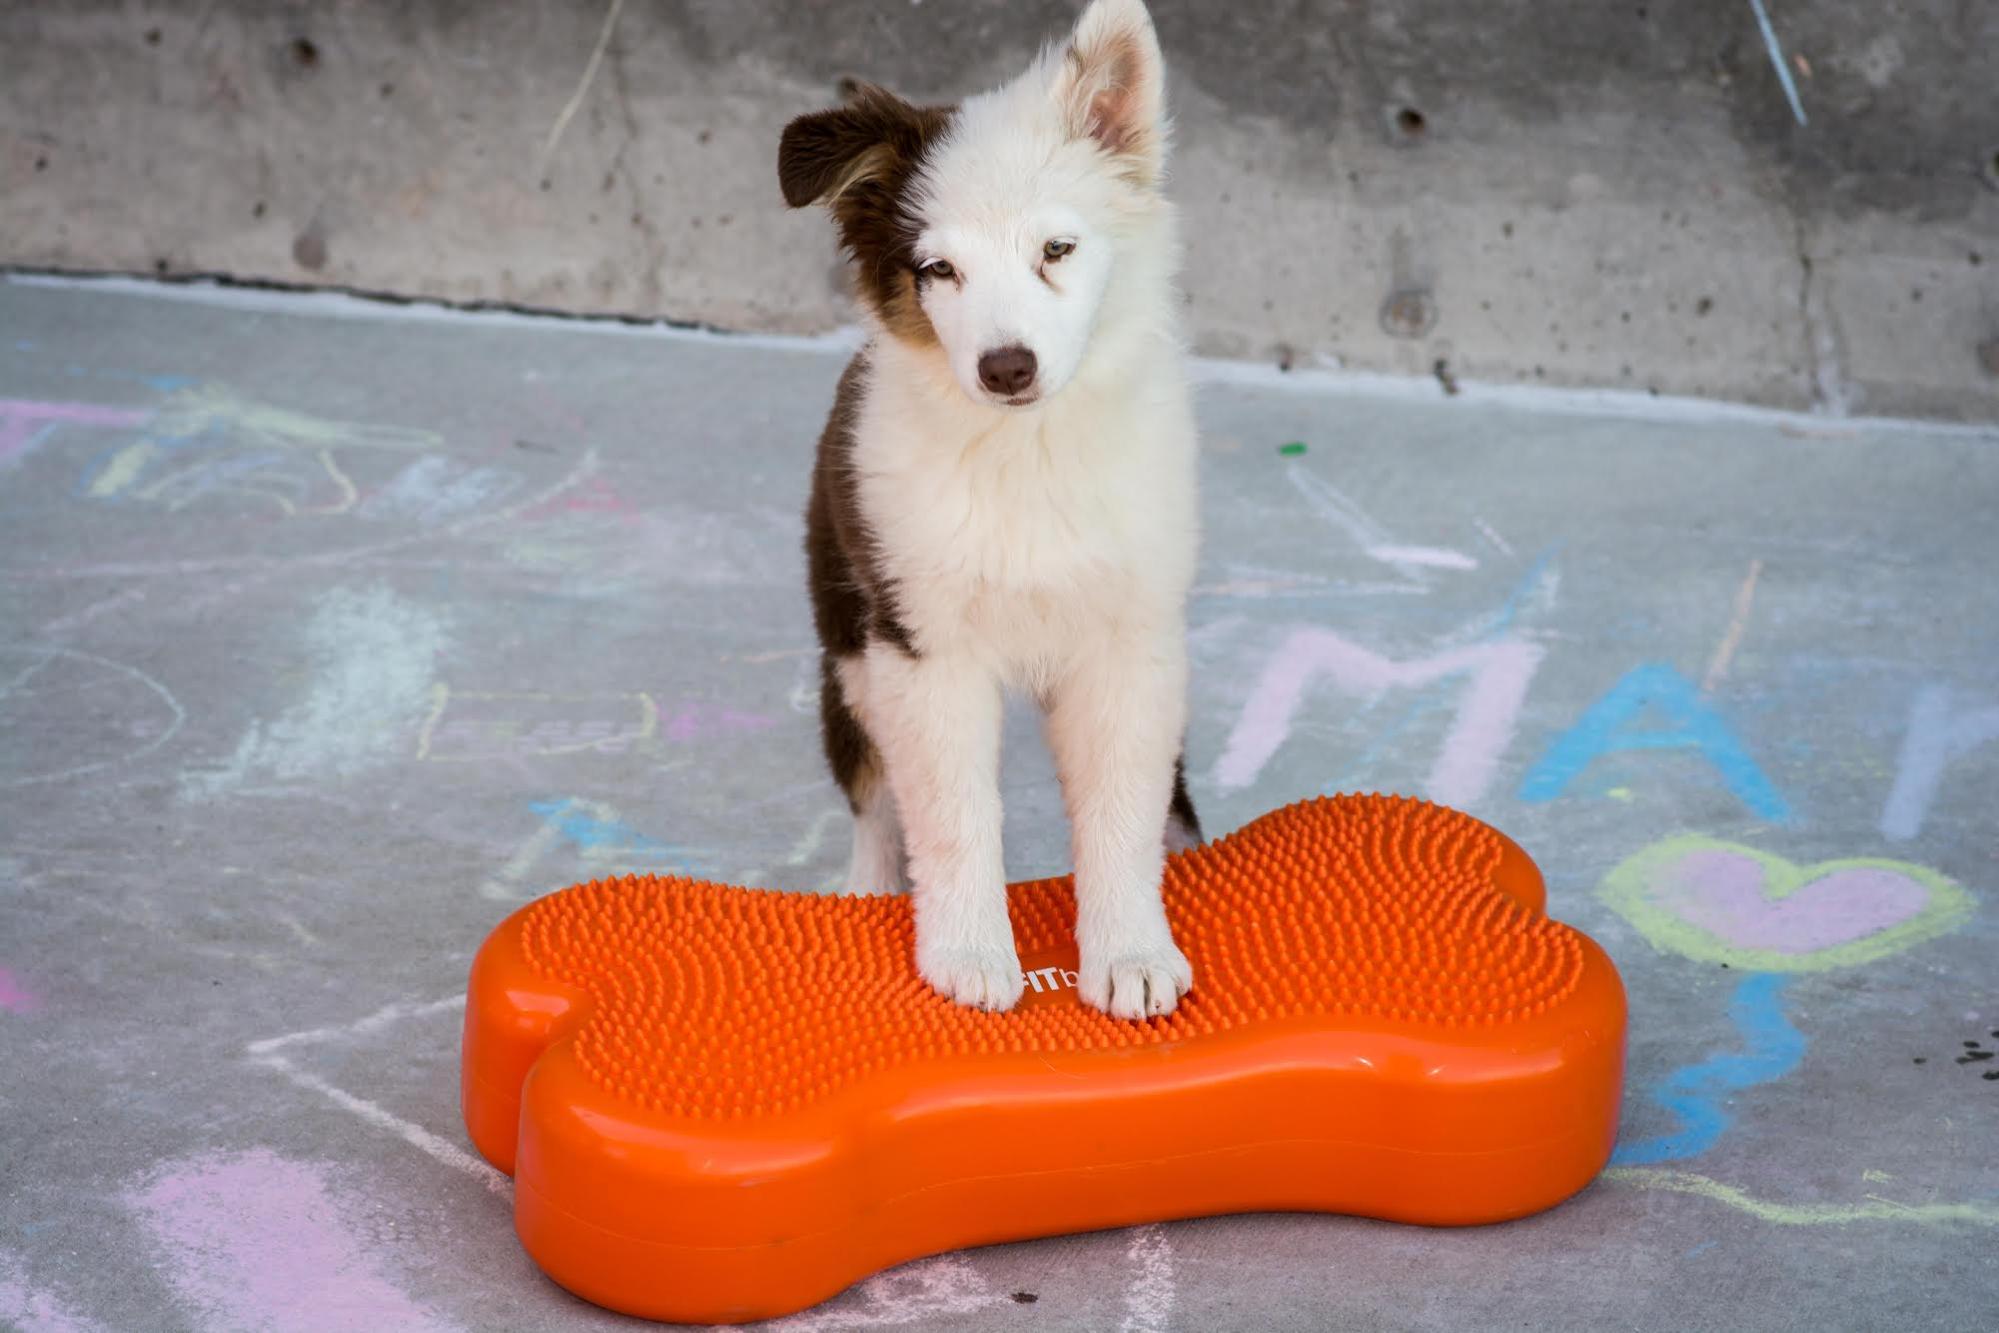 Dog Exercise Equipment: Should Every Pooch Parent Invest?